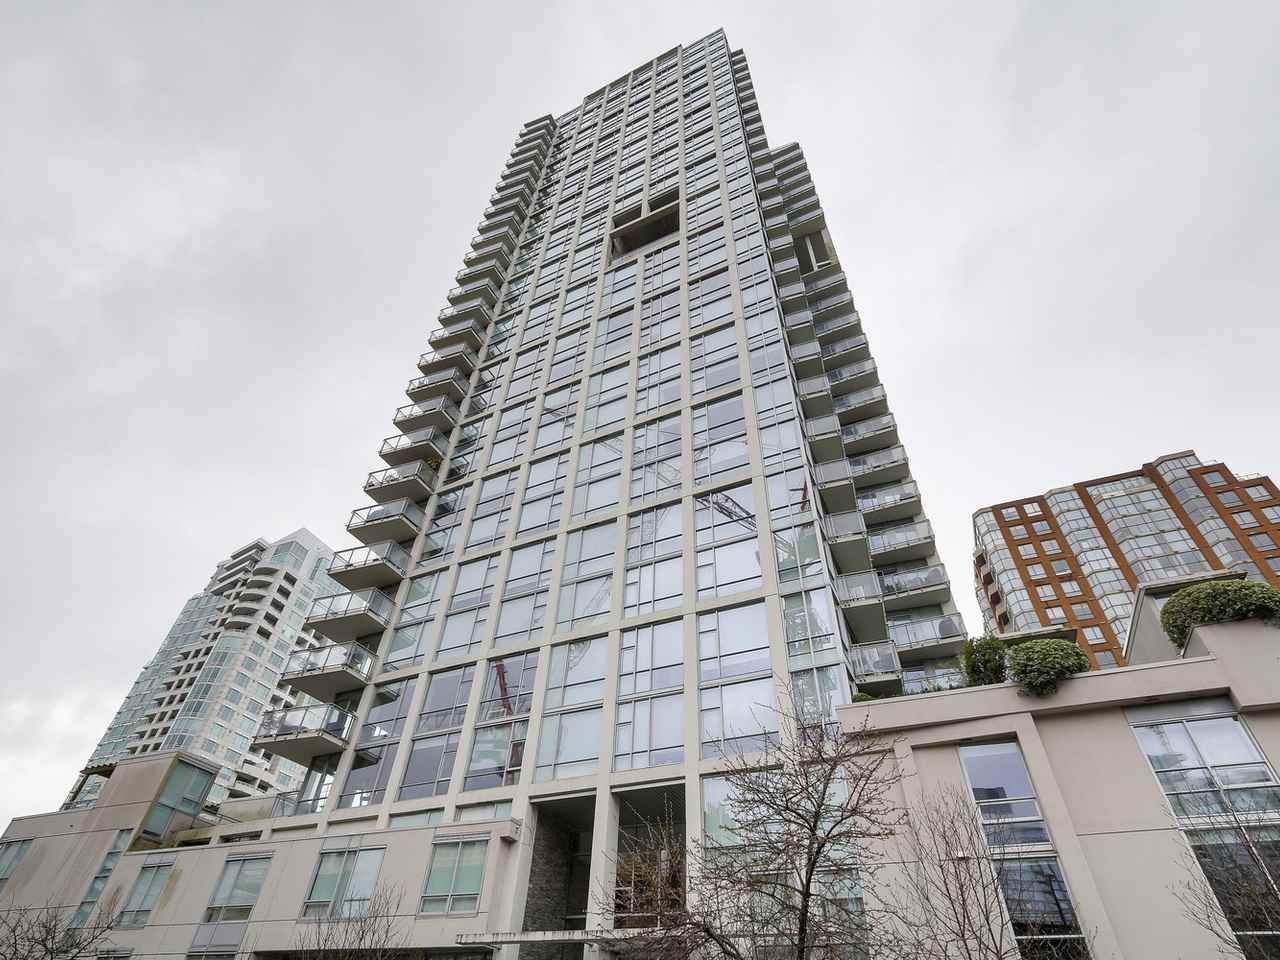 Main Photo: 401 1455 HOWE STREET in Vancouver: Yaletown Condo for sale (Vancouver West)  : MLS®# R2145939